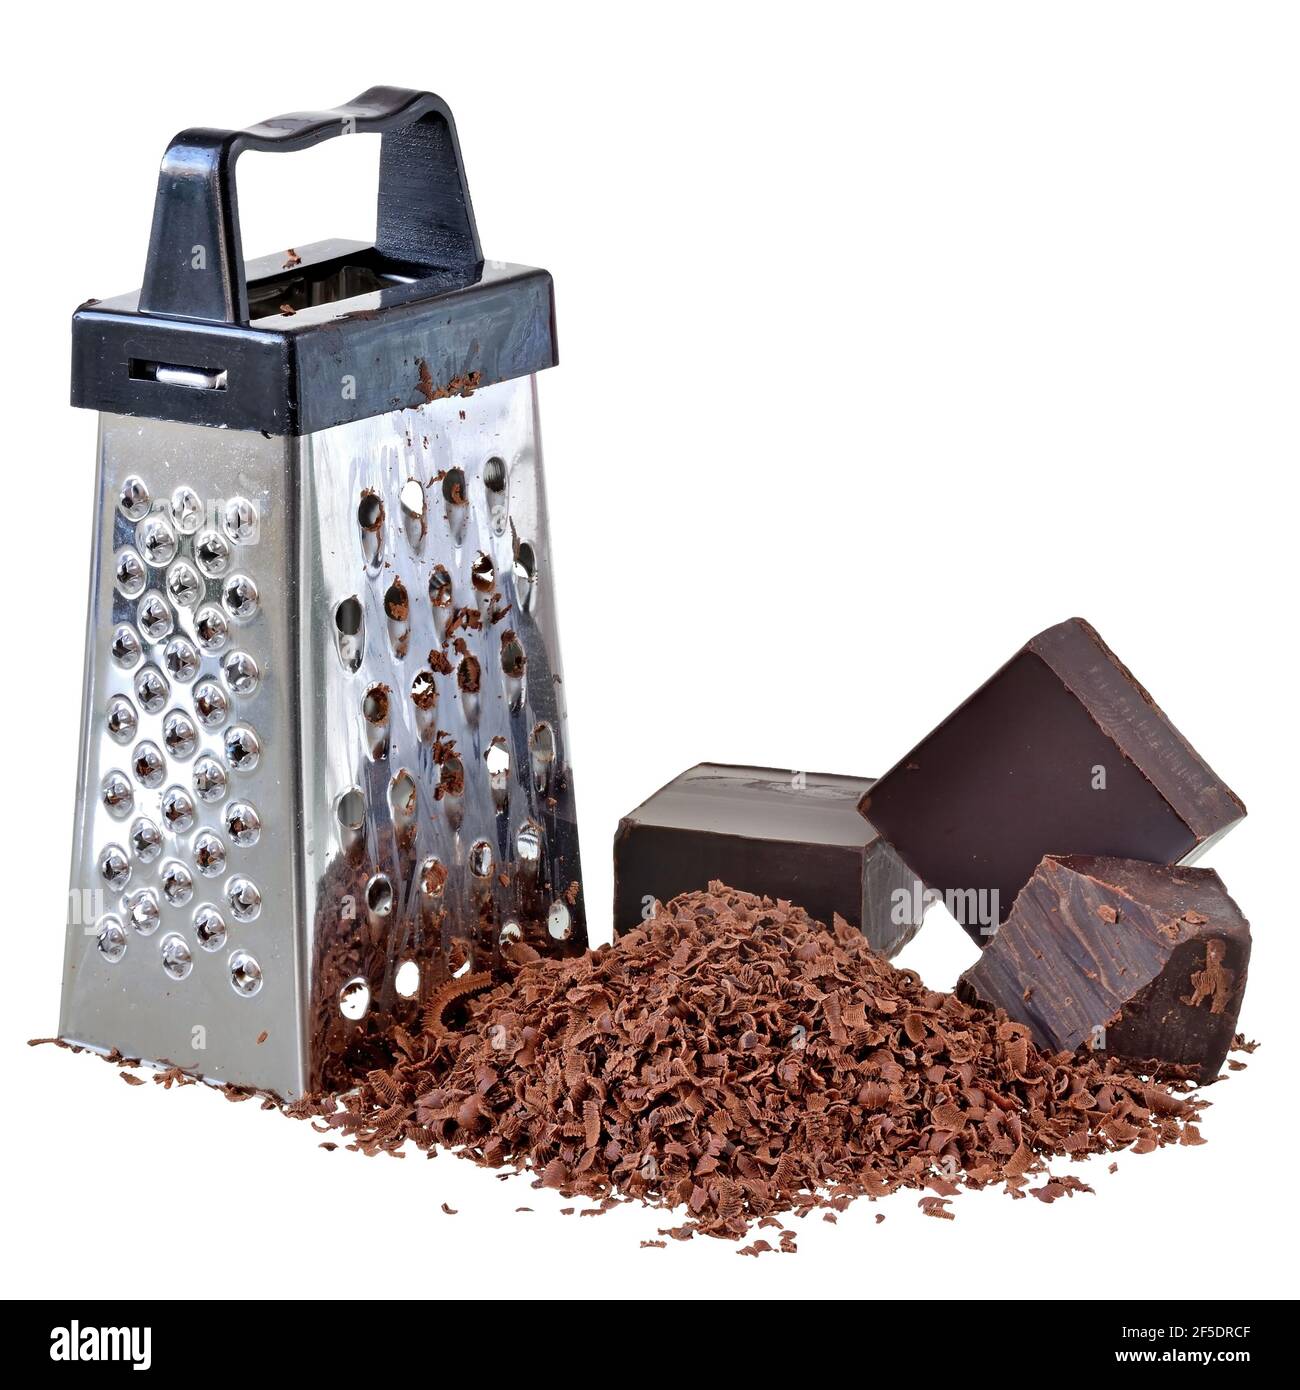 Grated chocolate and cube of bitter chocolate with a mini grater